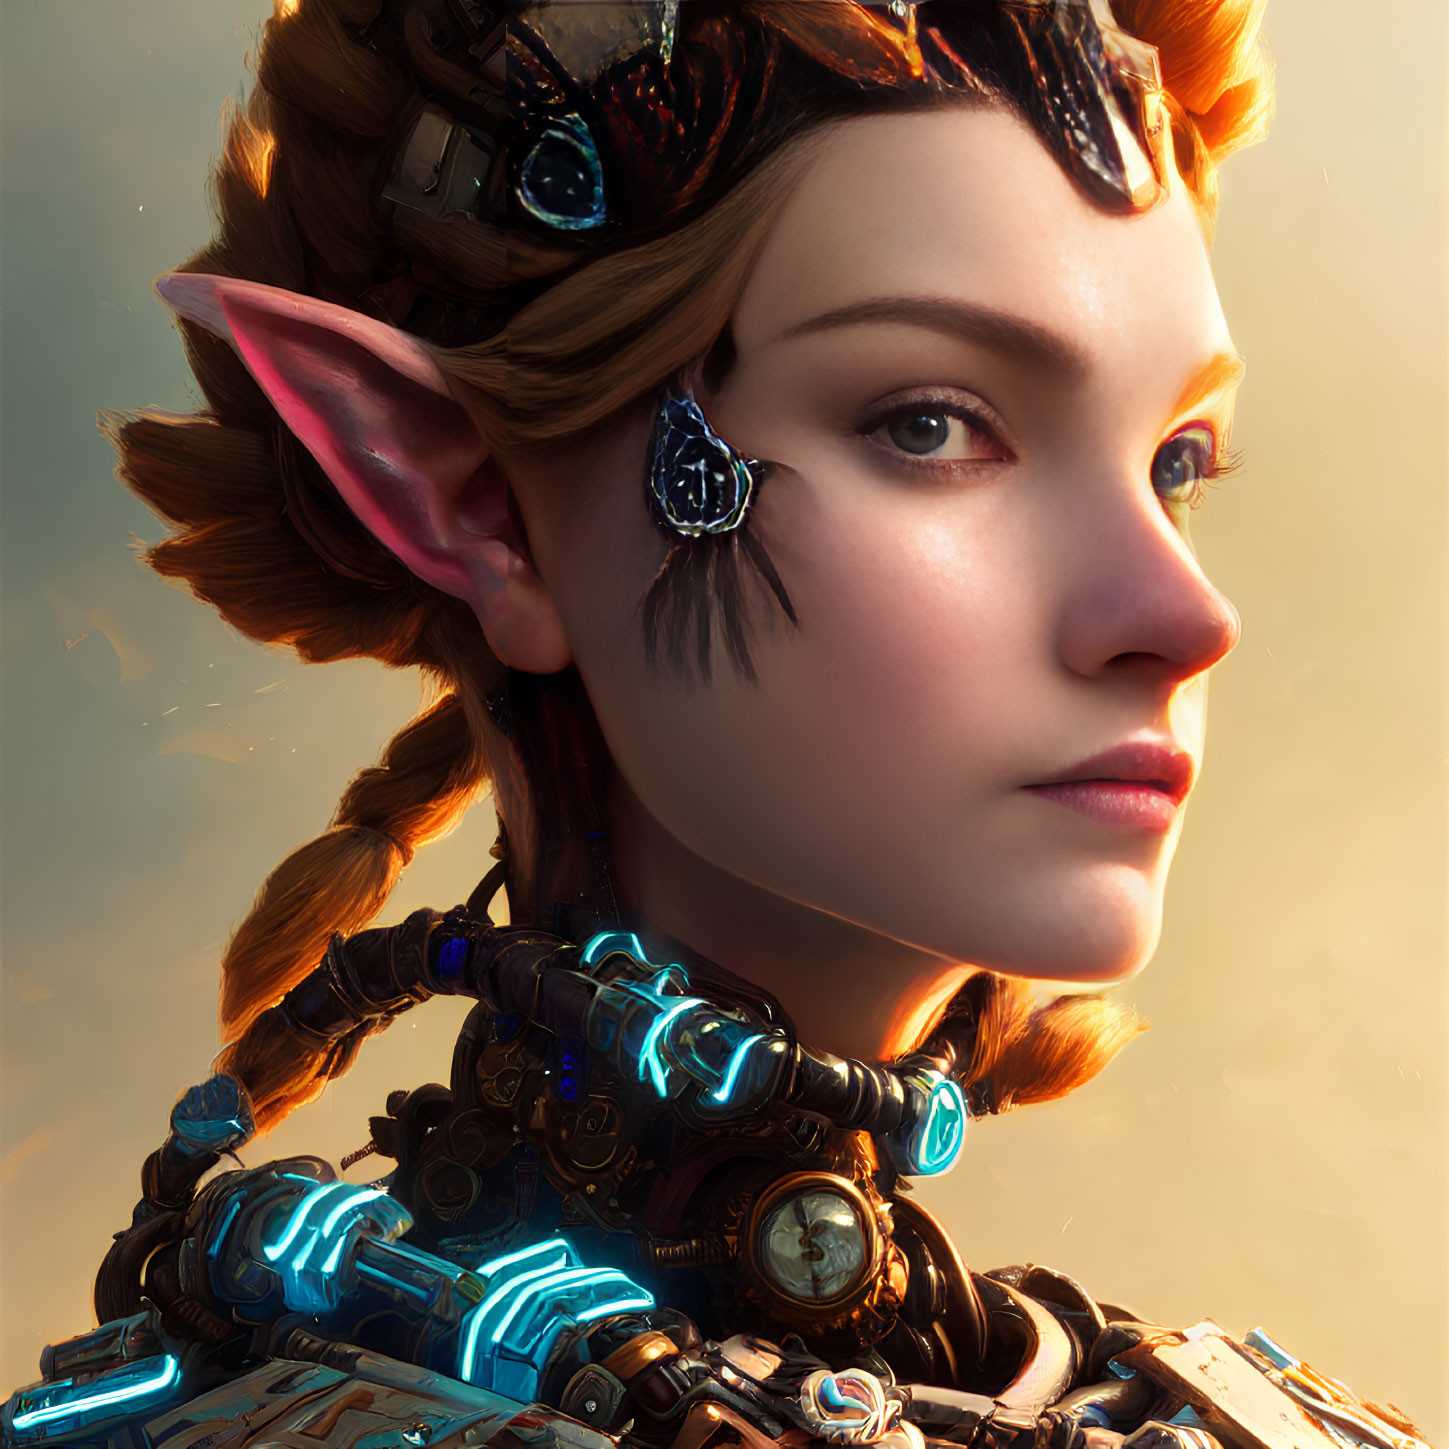 Female character with pointed ears in cybernetic armor and futuristic accessories on warm backlit background.